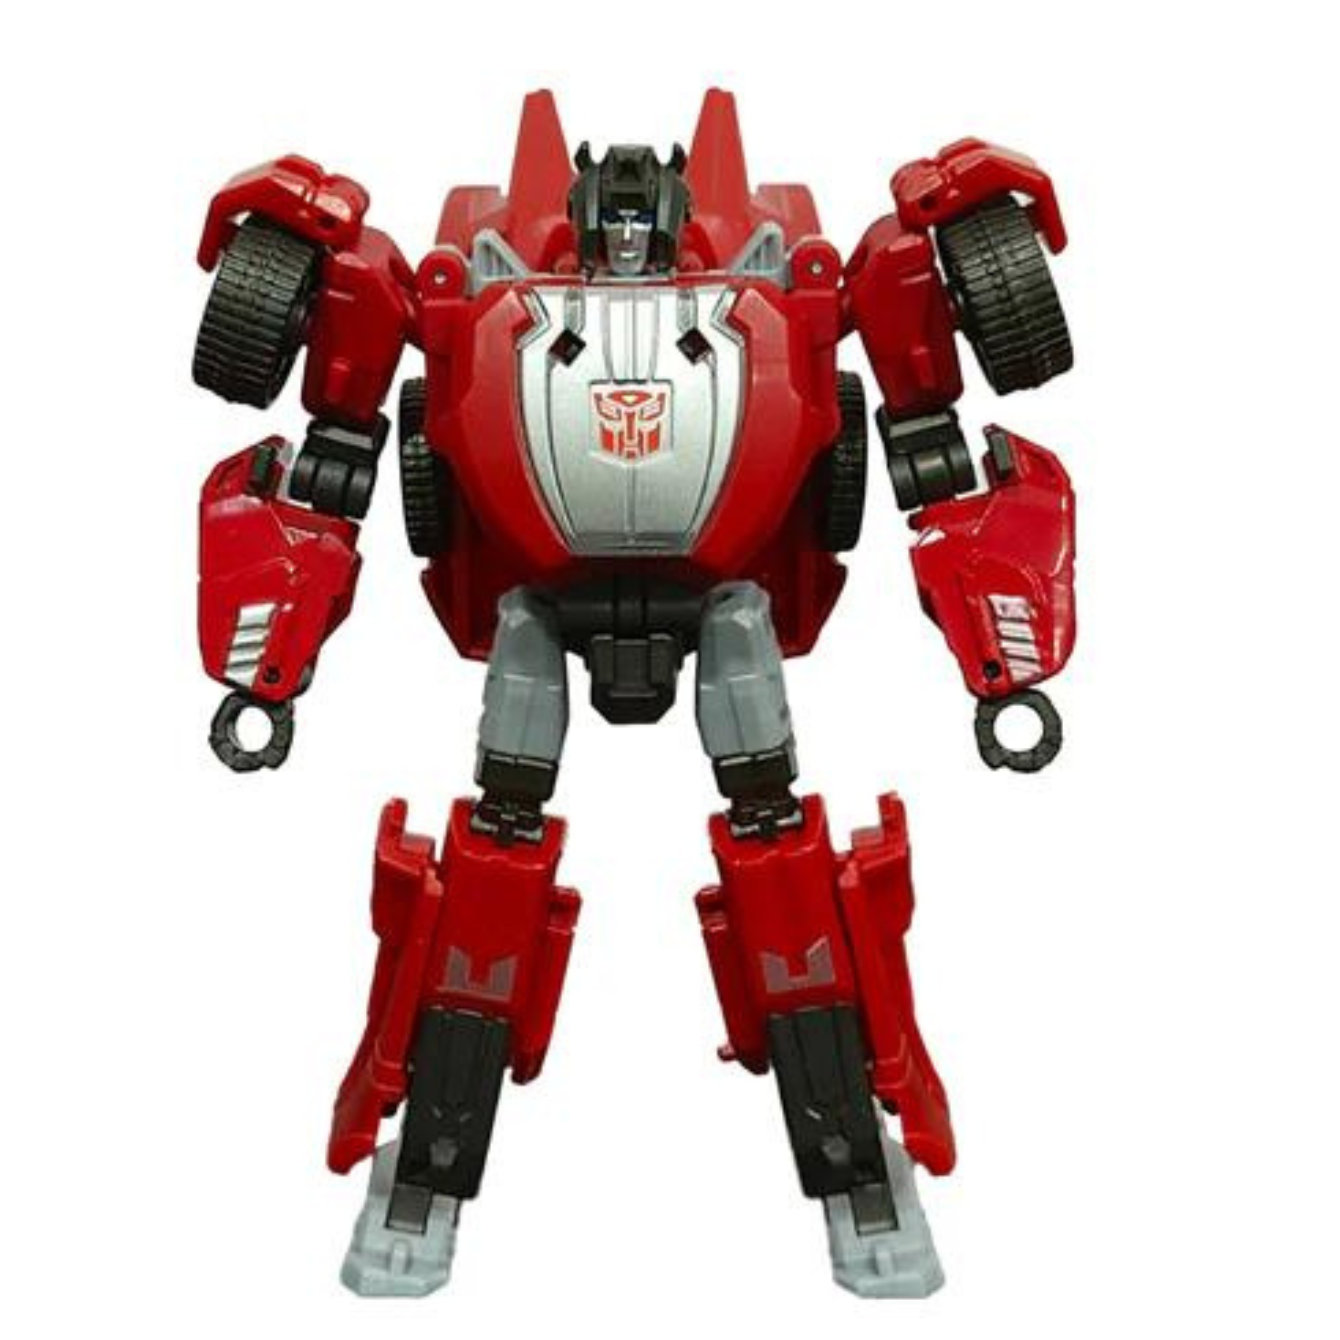 TRANSFORMERS STUDIO SERIES +07 GAMER EDITION SIDESWIPE (WAR FOR CYBERTRON) - DELUXE